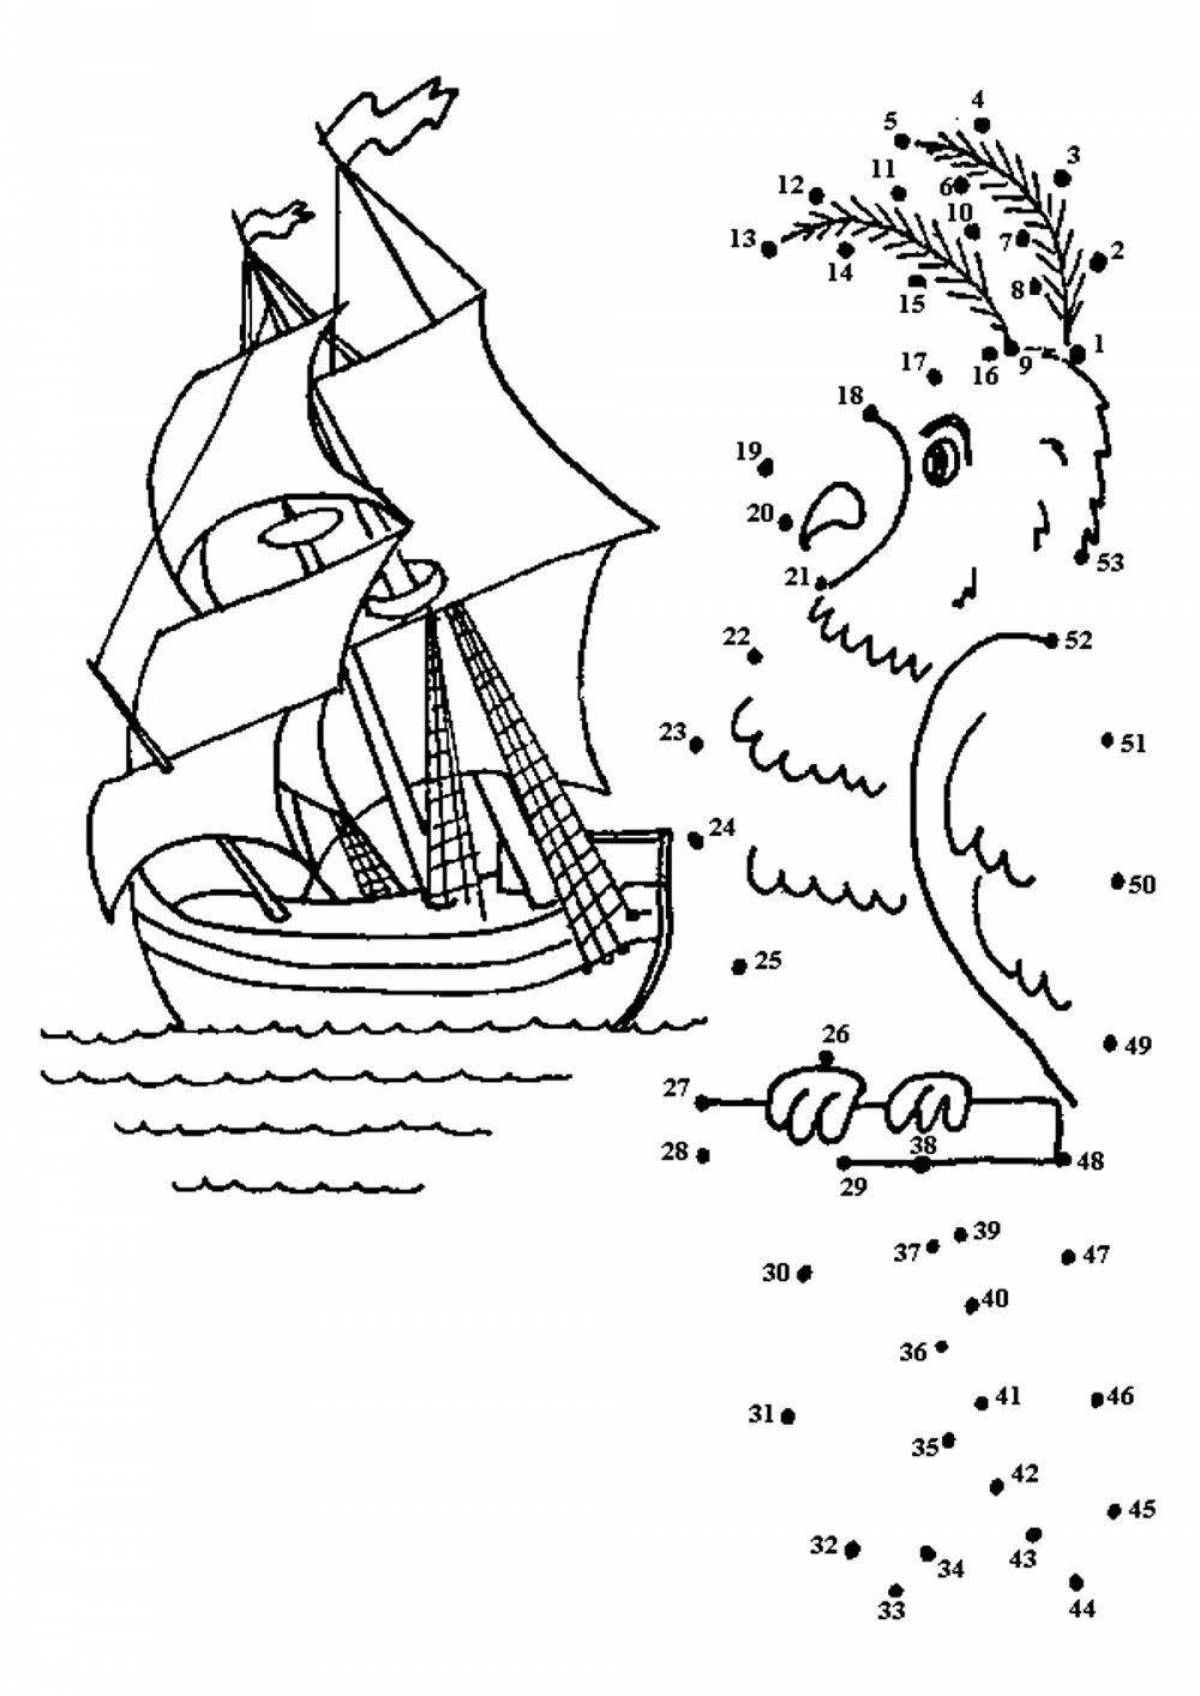 Great boat coloring book for 6-7 year olds